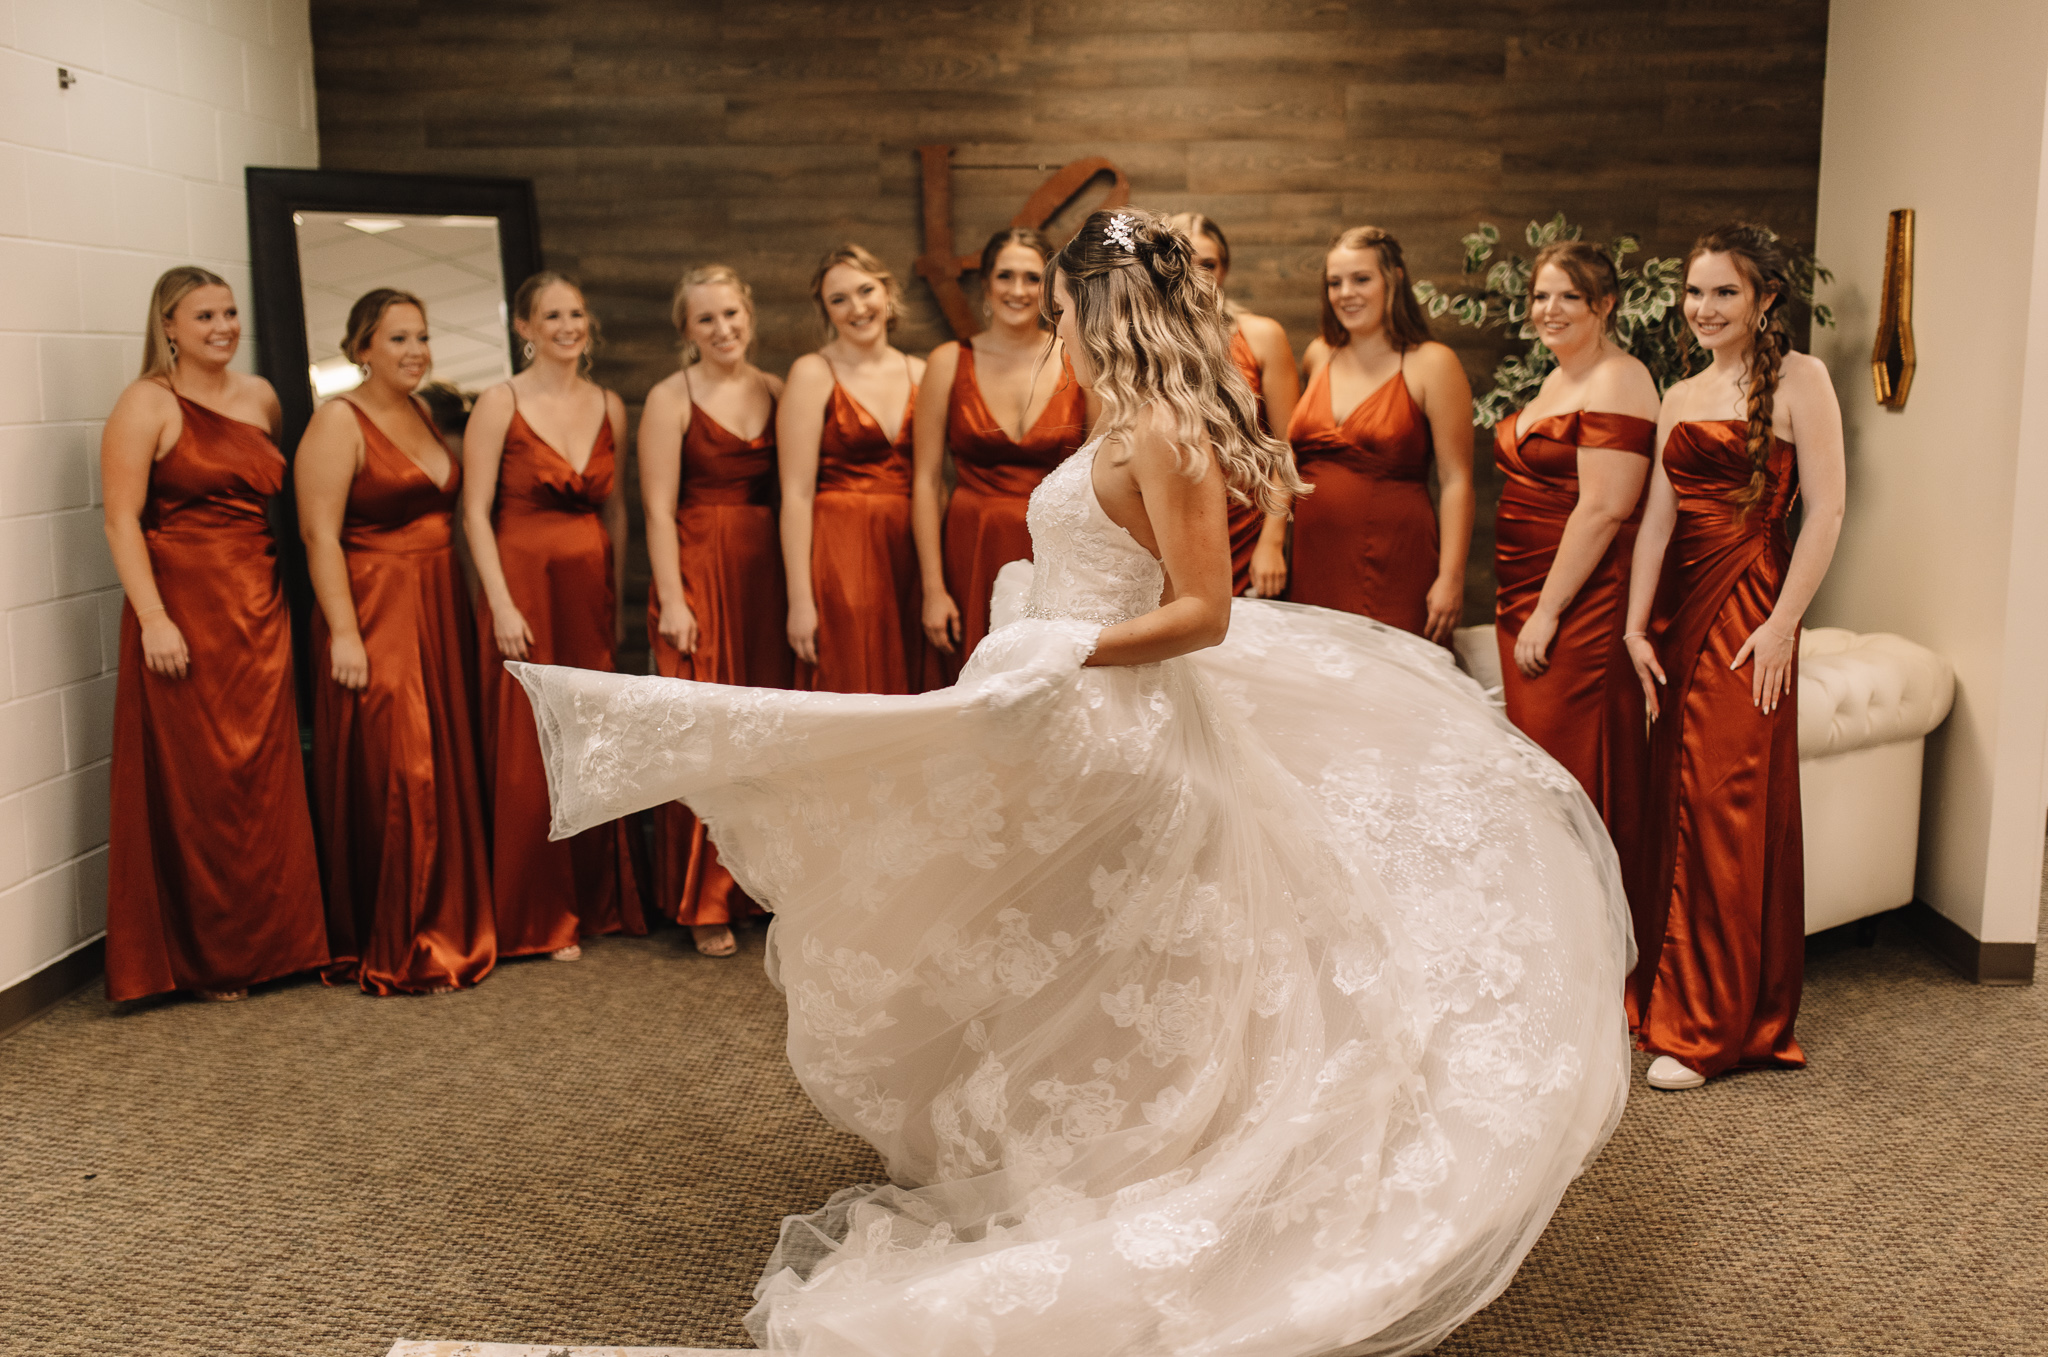 A bride swaying around in her dress in front of her bridesmaids who are wearing terracotta bridesmaids dresses